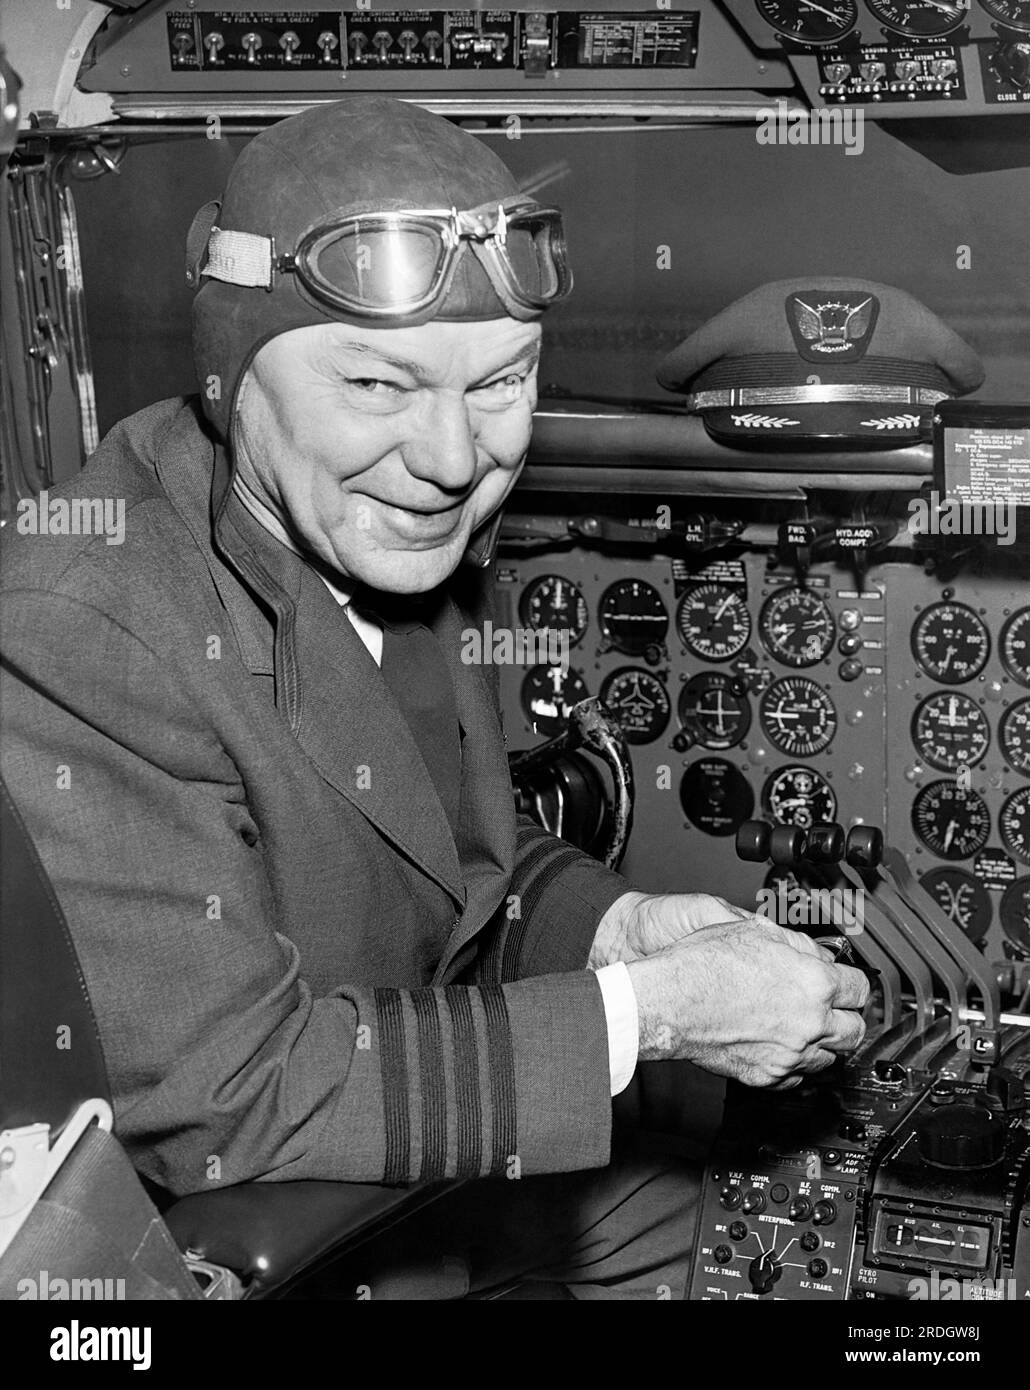 San Francisco, California: 1958 A pilot wearing old time aviation head gear and goggles in the cockpit of a modern airplane. Stock Photo